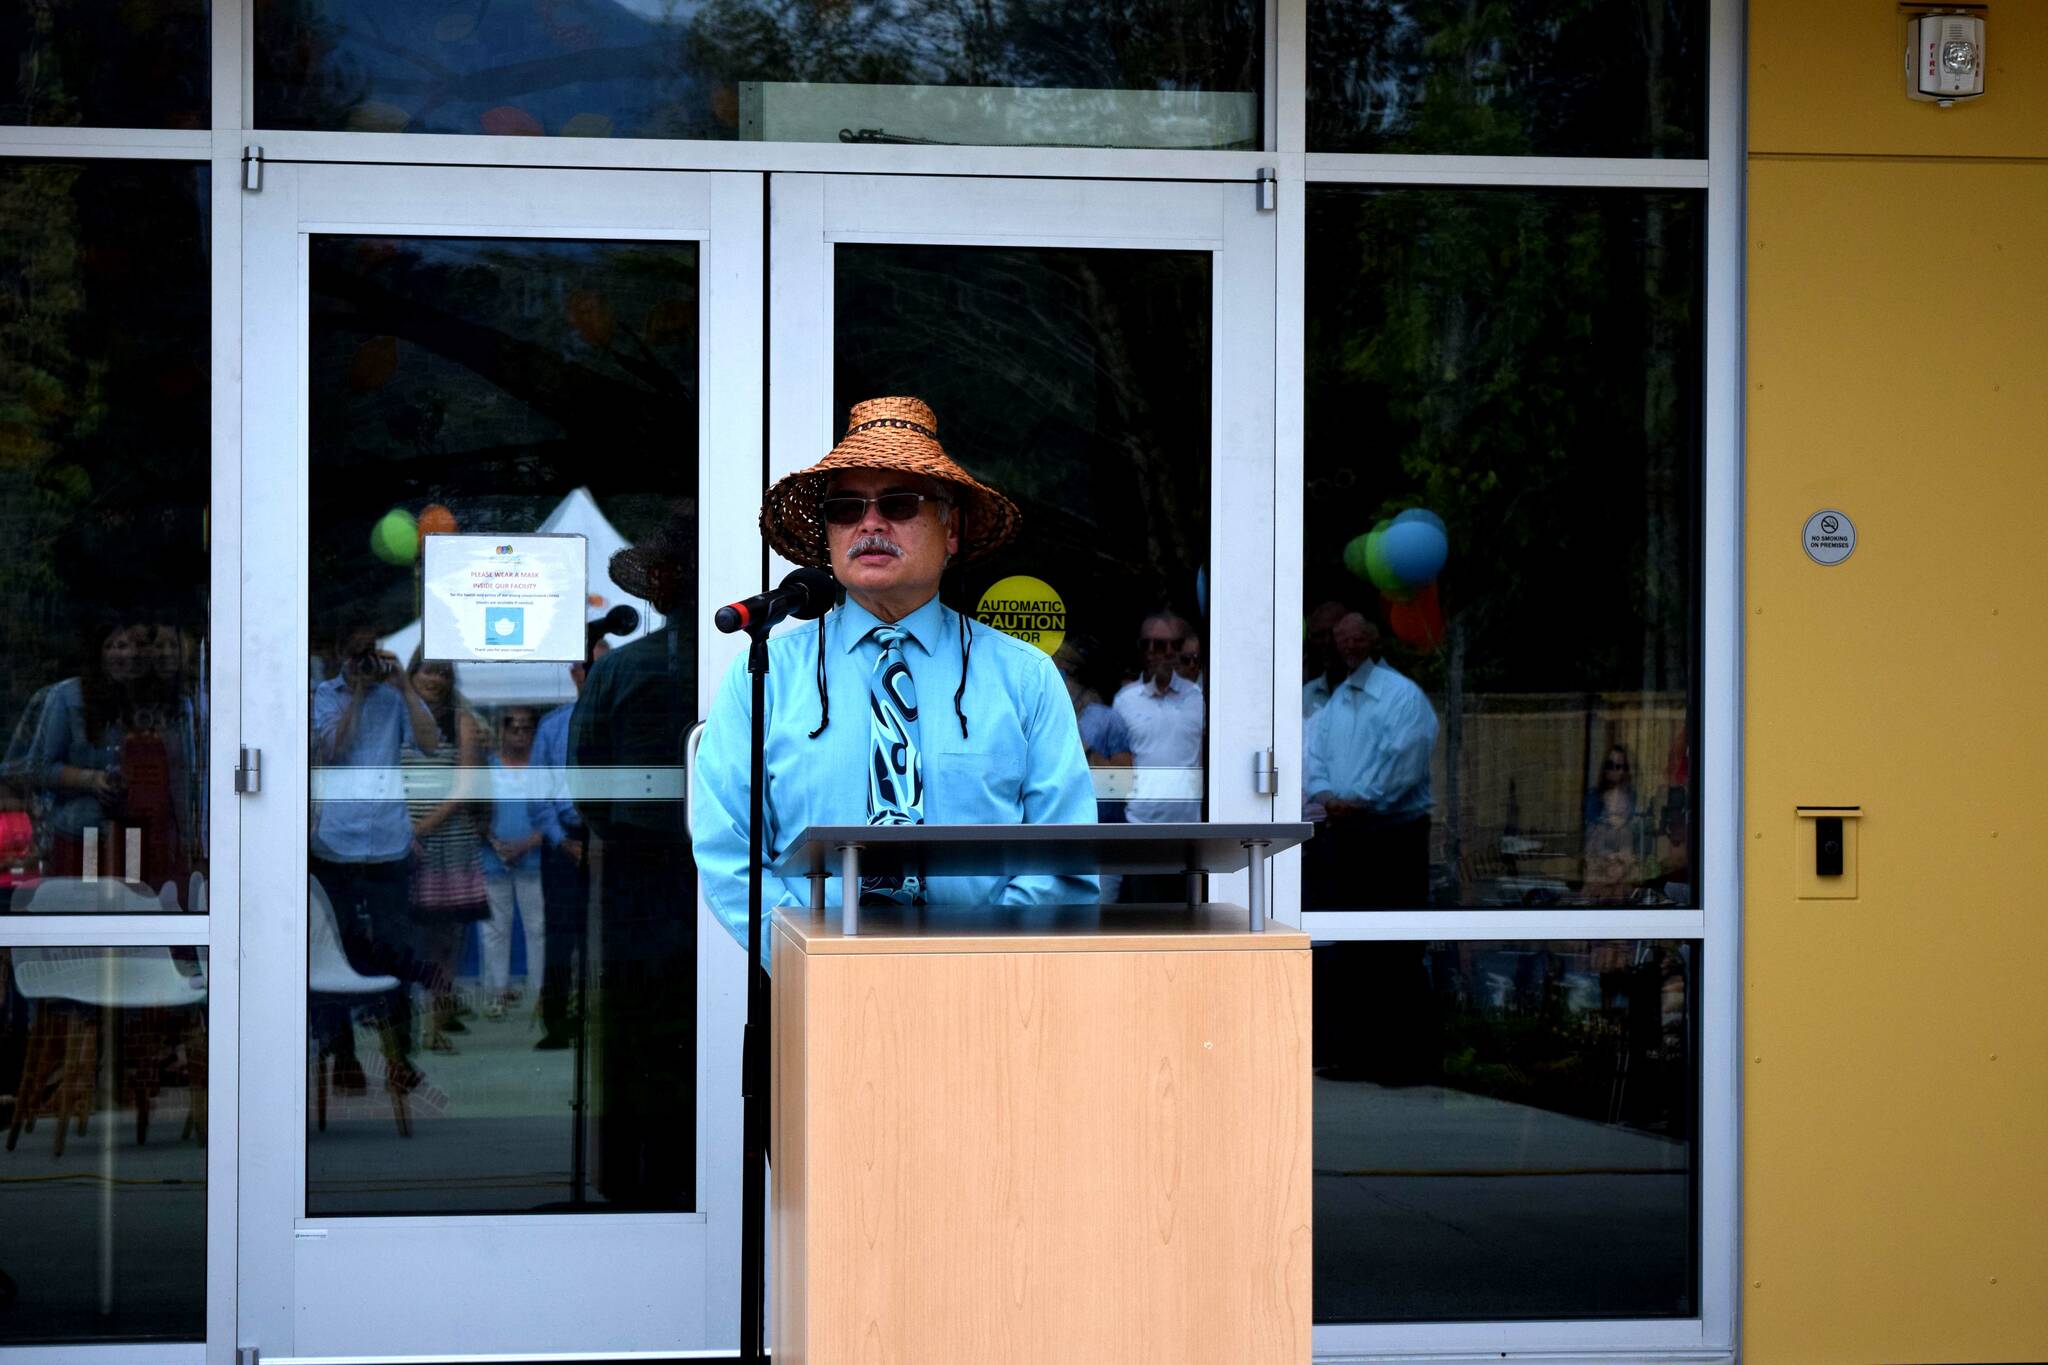 Snoqualmie Tribal Chairman Robert de los Angeles speaking at an event for Encompass NW in 2021. File photo/Conor Wilson.